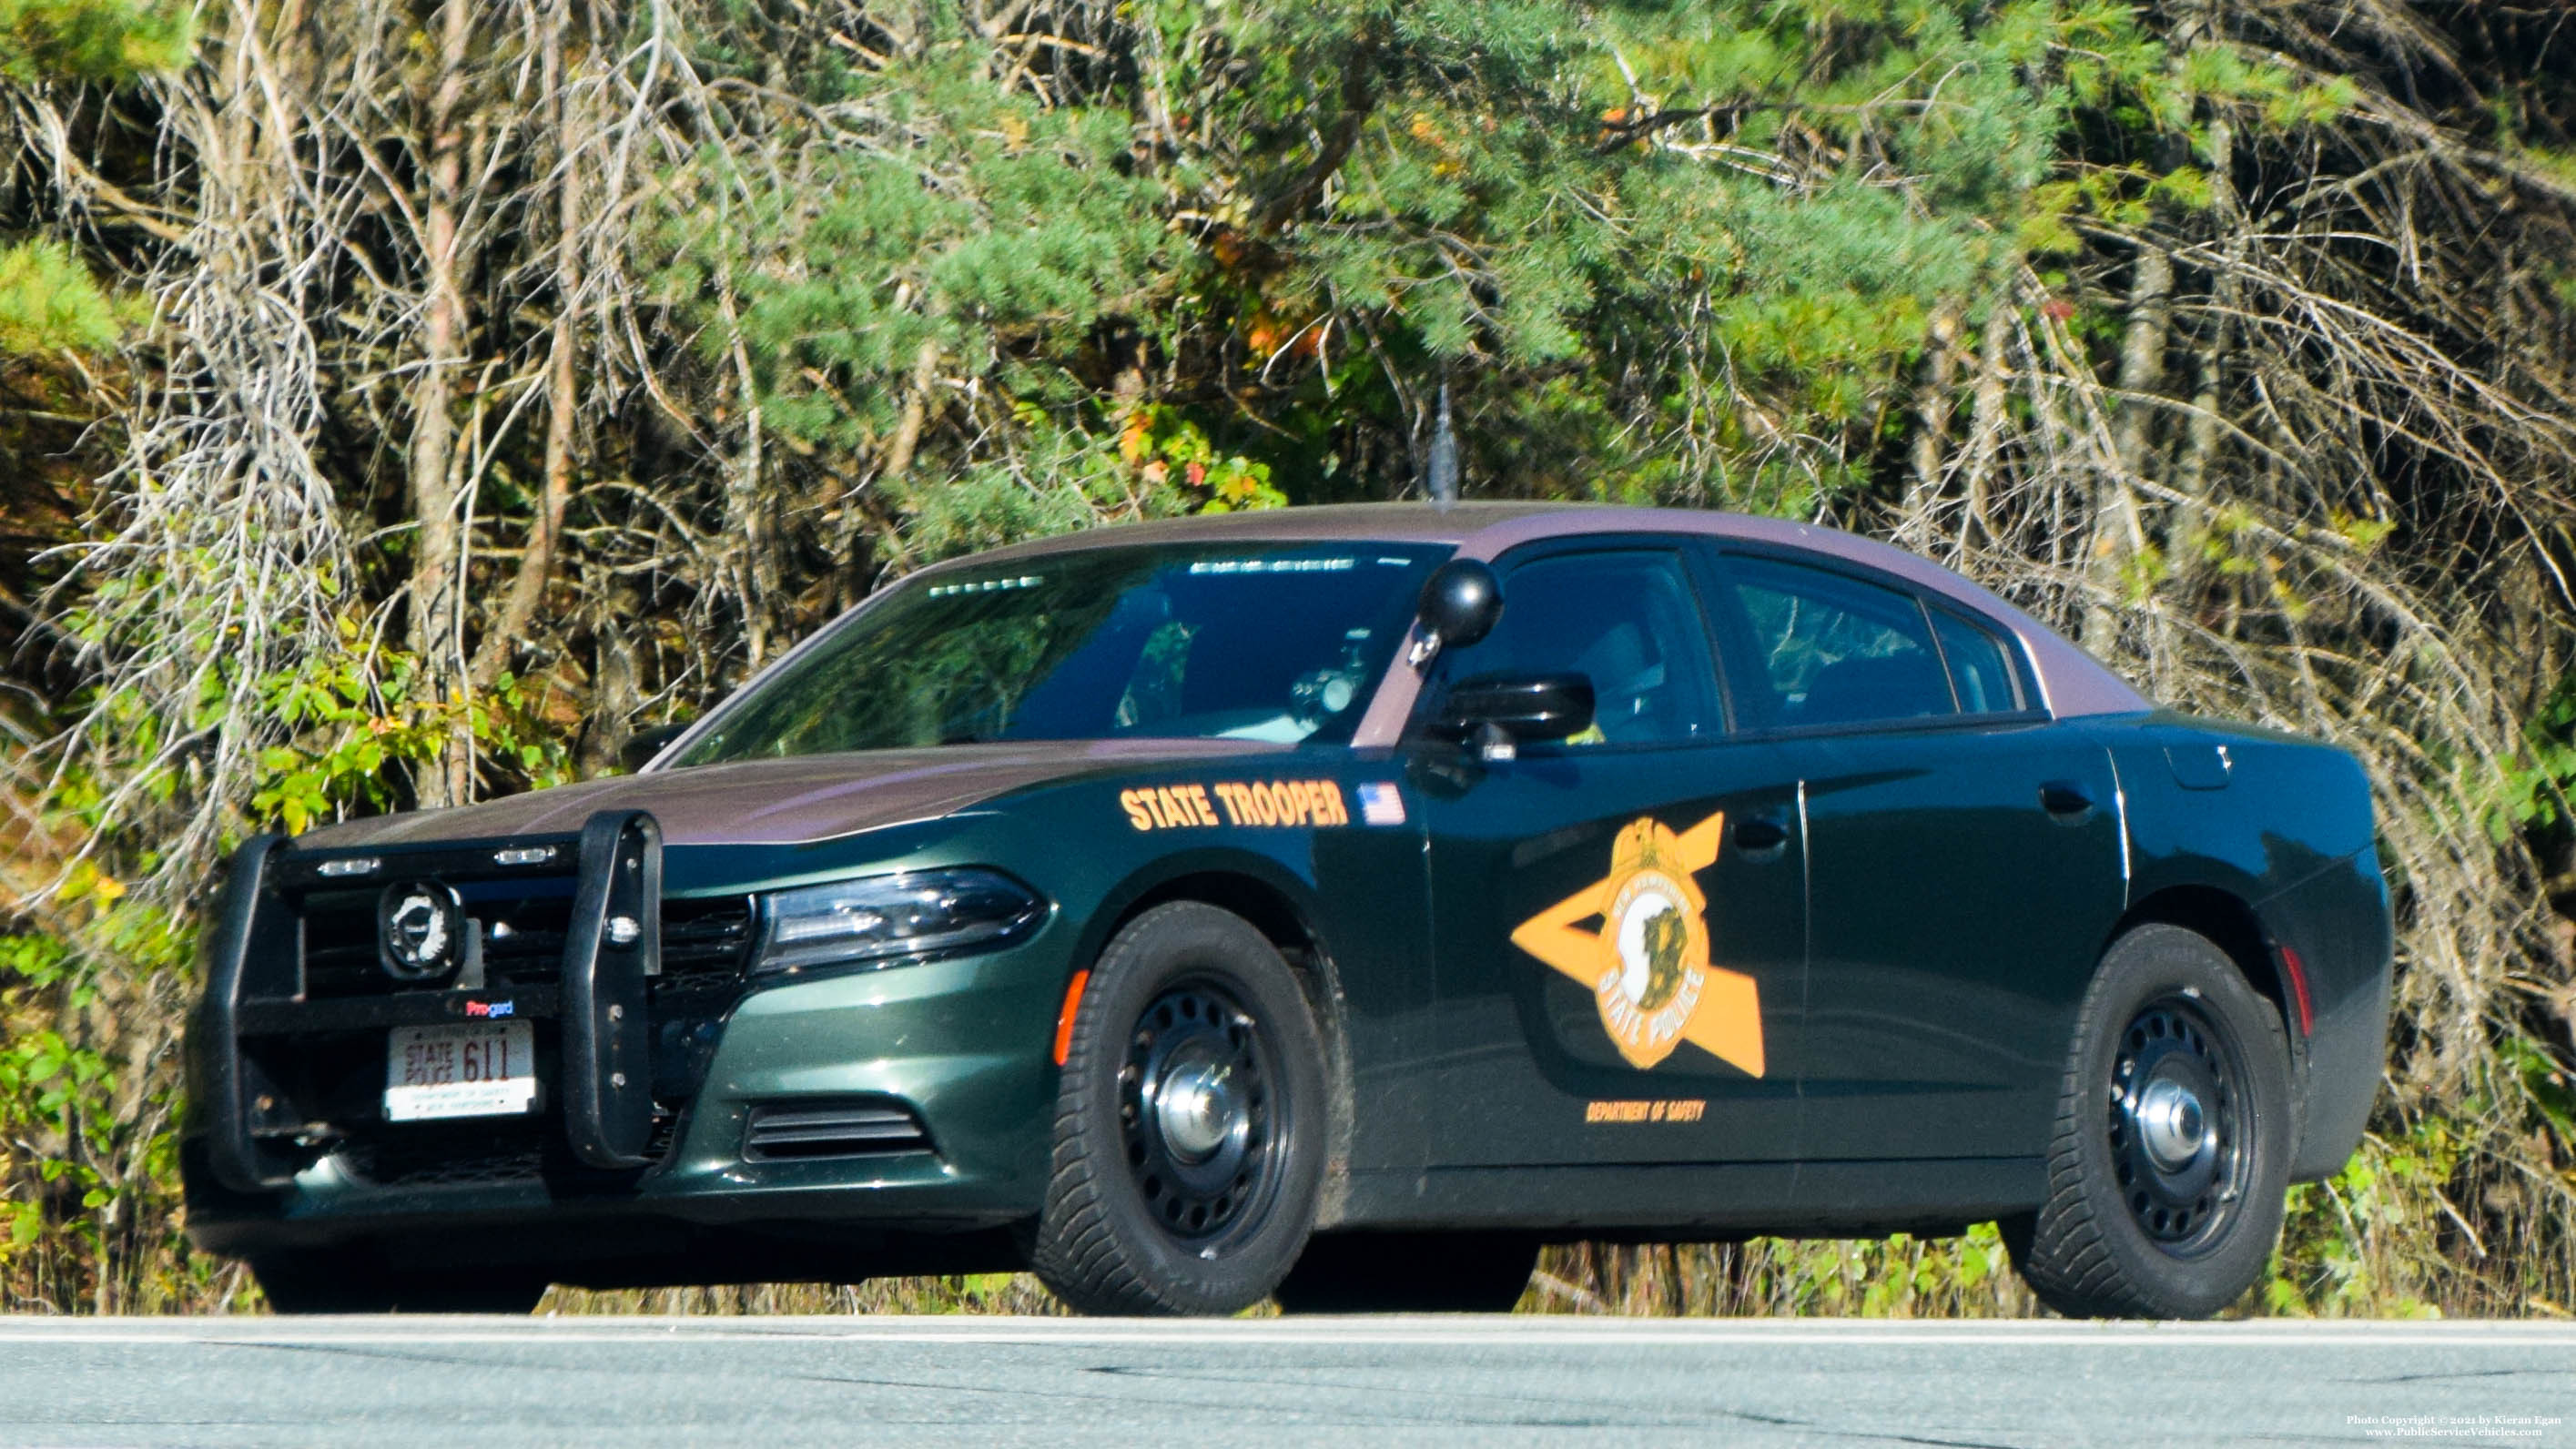 A photo  of New Hampshire State Police
            Cruiser 611, a 2015-2019 Dodge Charger             taken by Kieran Egan